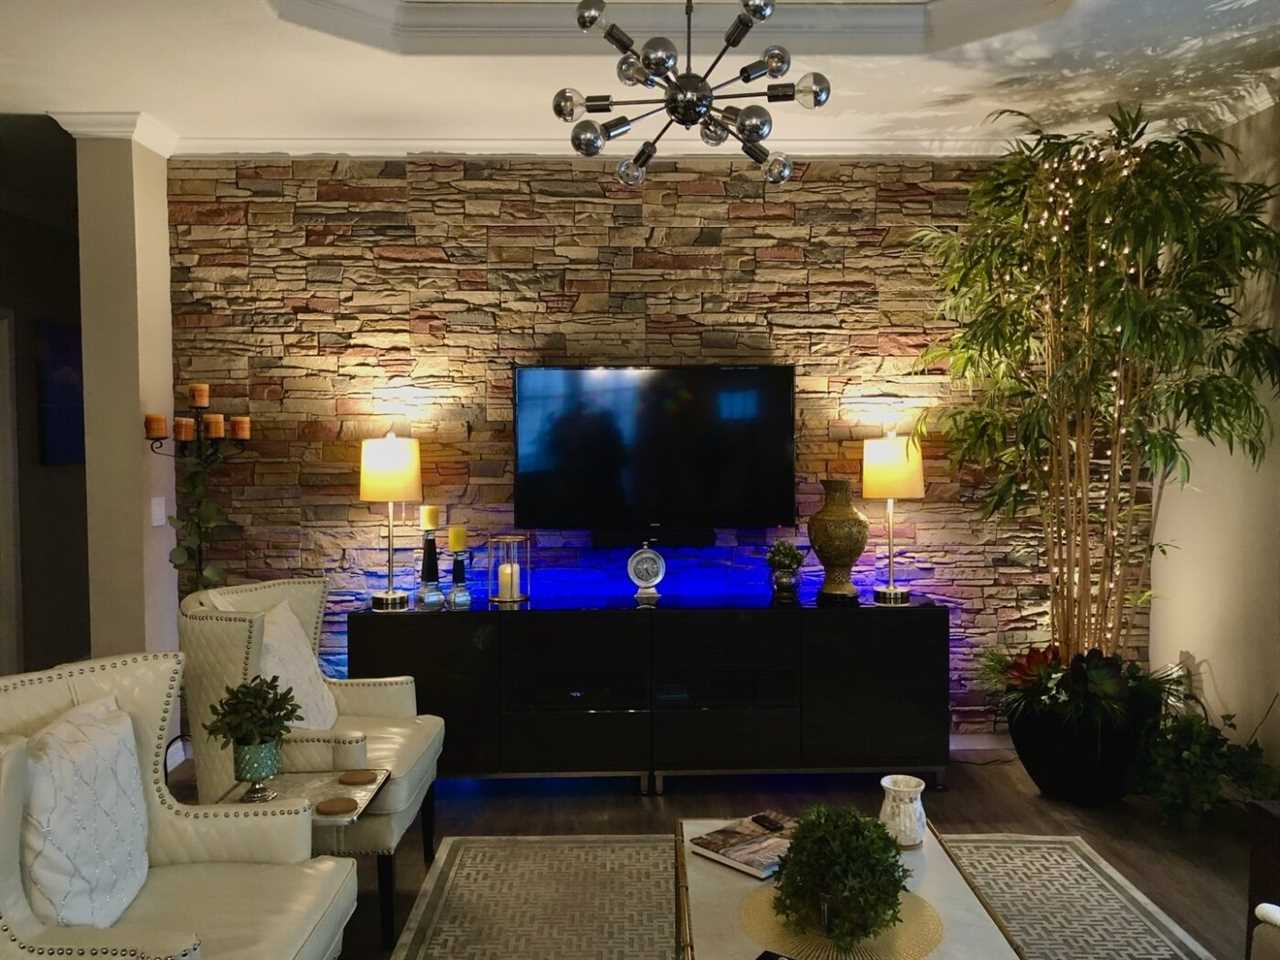 Benefits of a TV Accent Wall